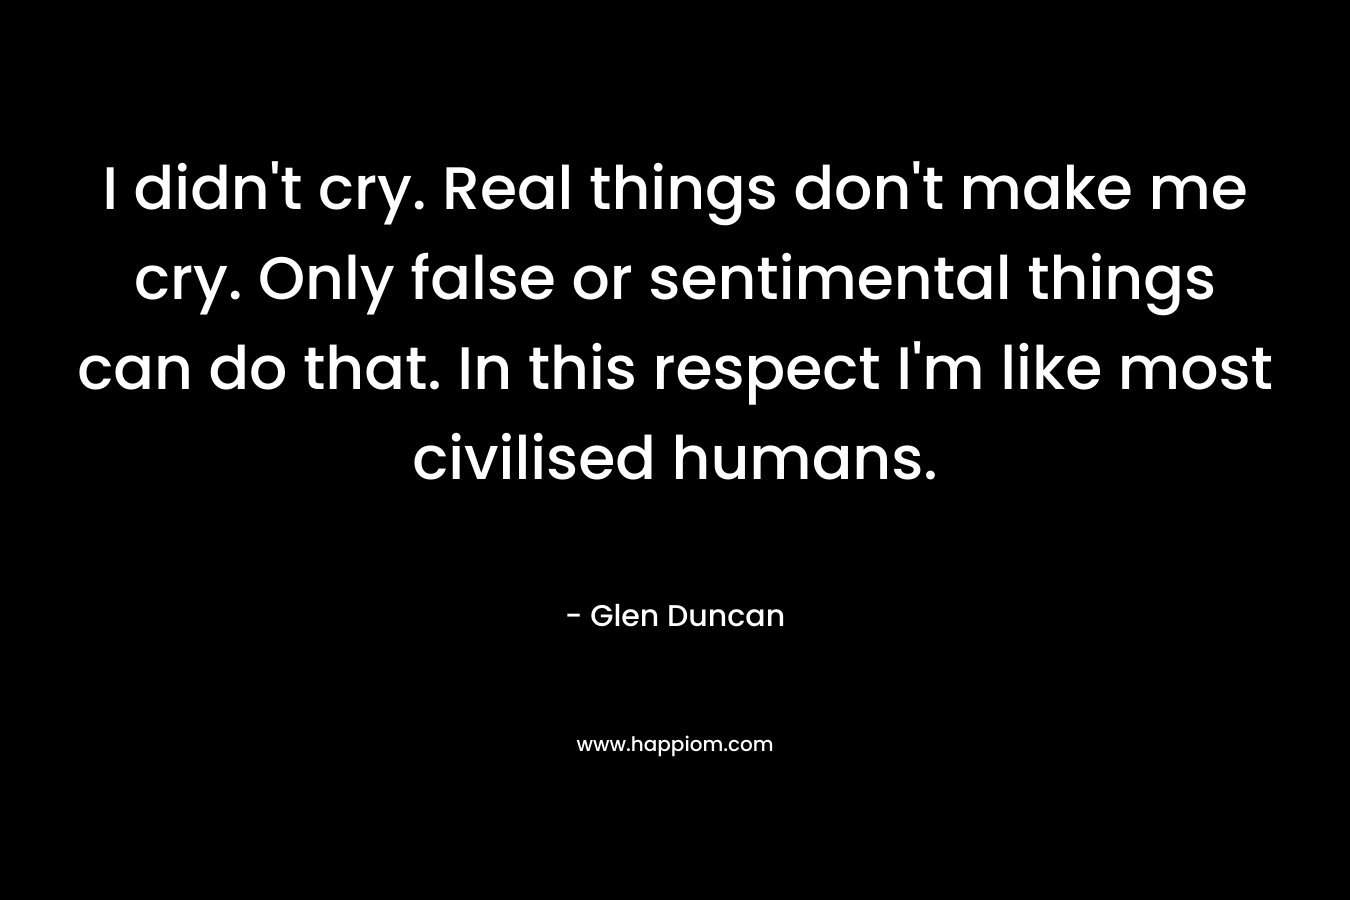 I didn’t cry. Real things don’t make me cry. Only false or sentimental things can do that. In this respect I’m like most civilised humans. – Glen Duncan